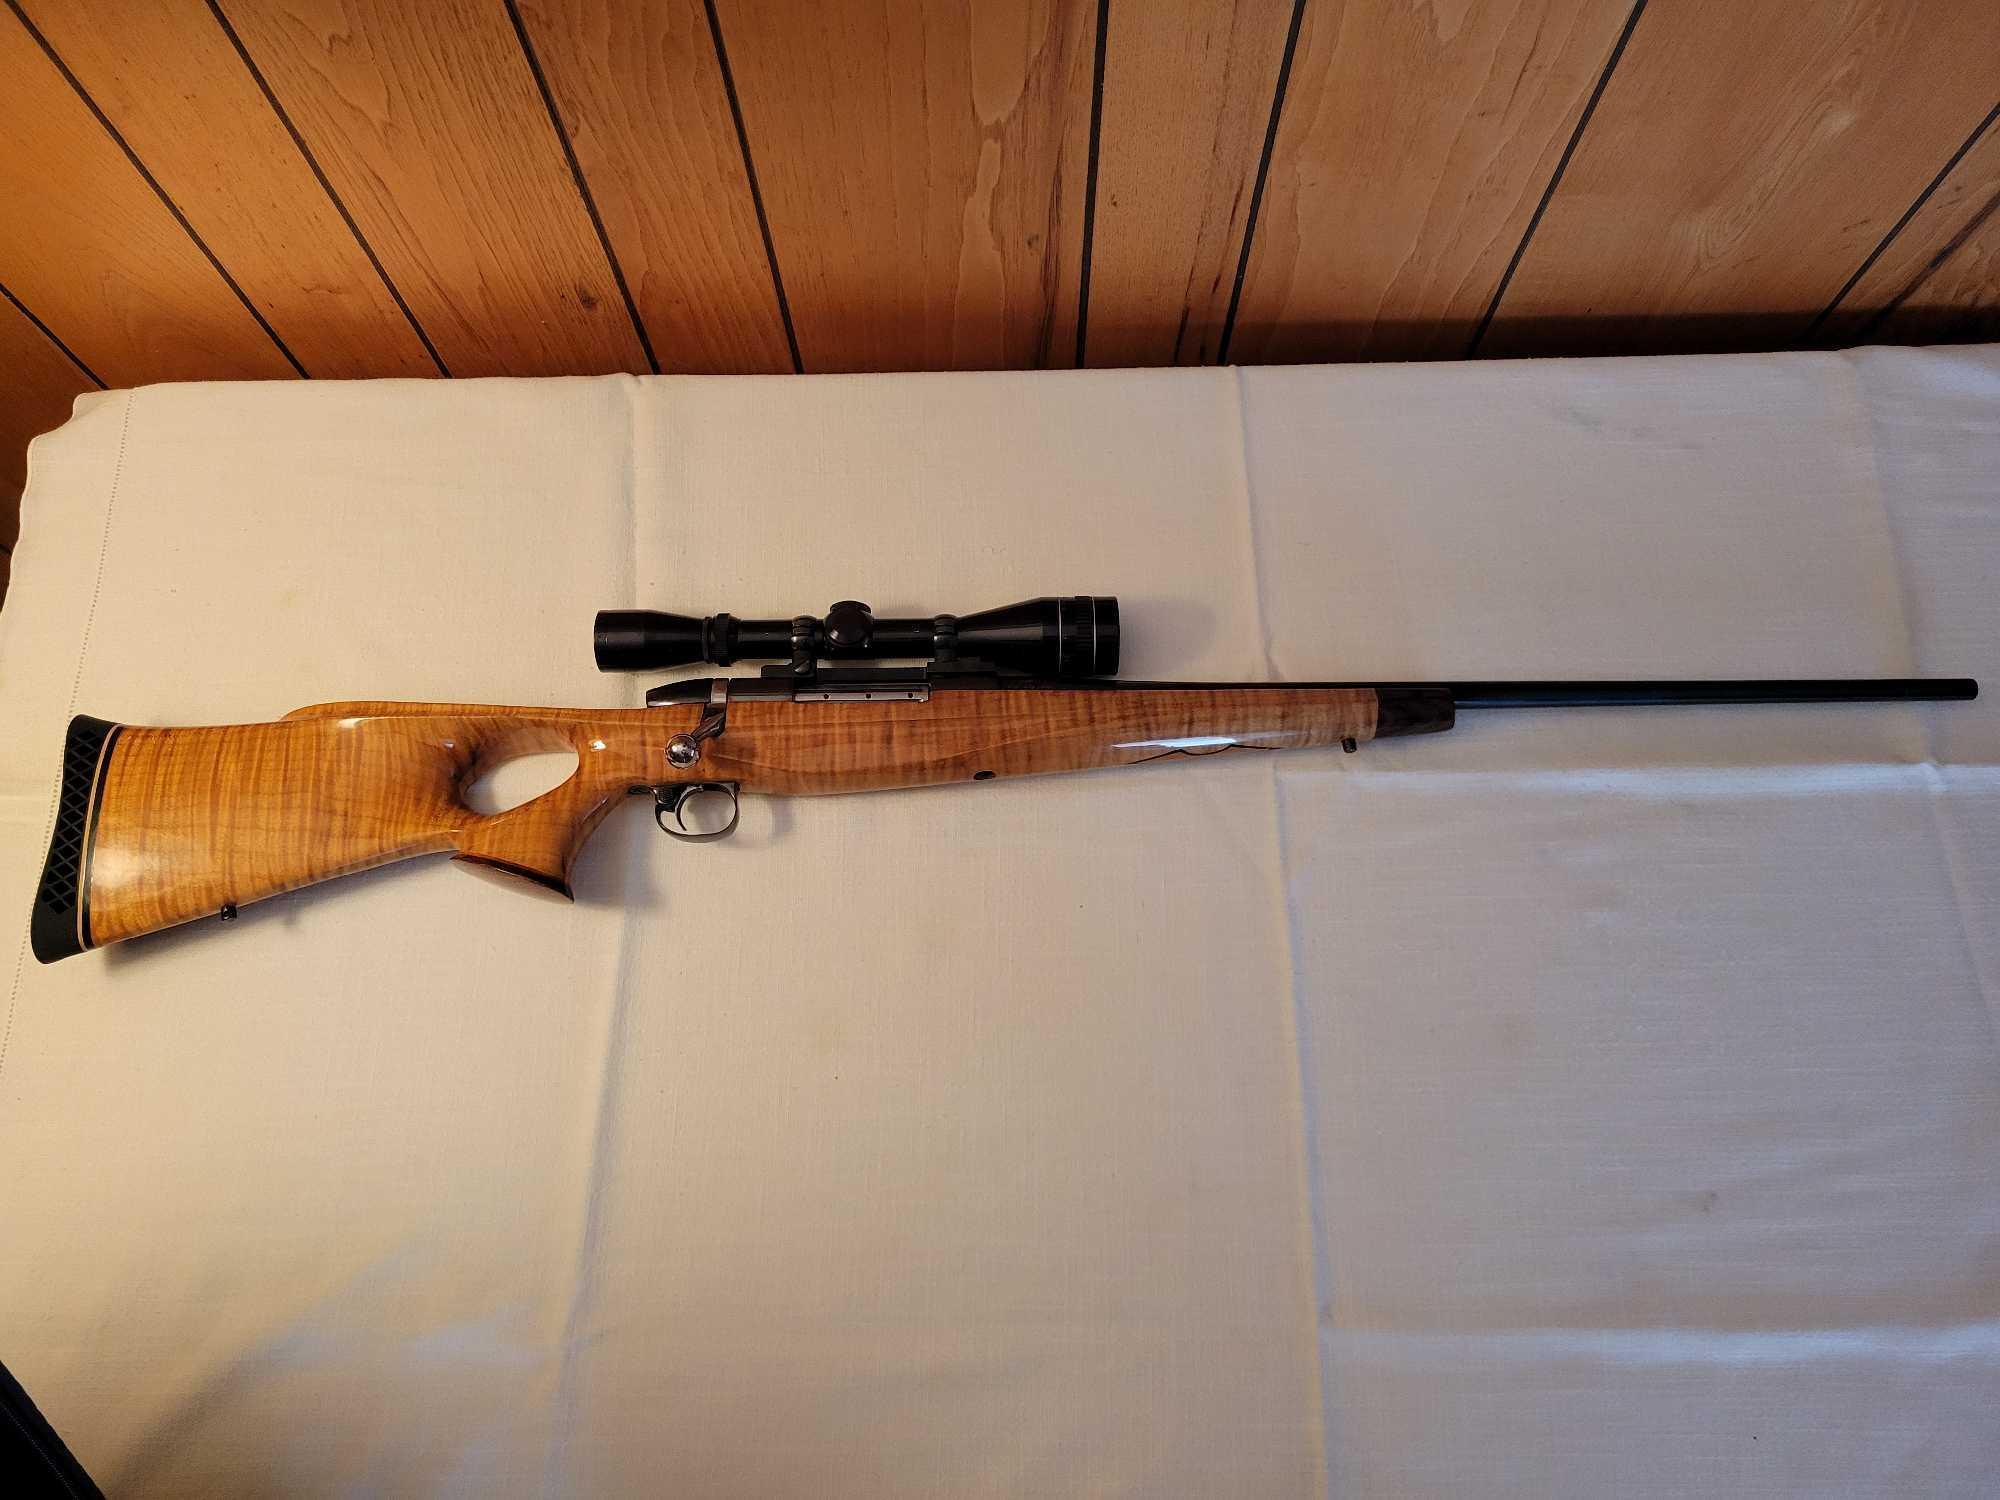 Weatherby mark 270 wby. mag. bolt action rifle with 3-9 leupold scope and hard case